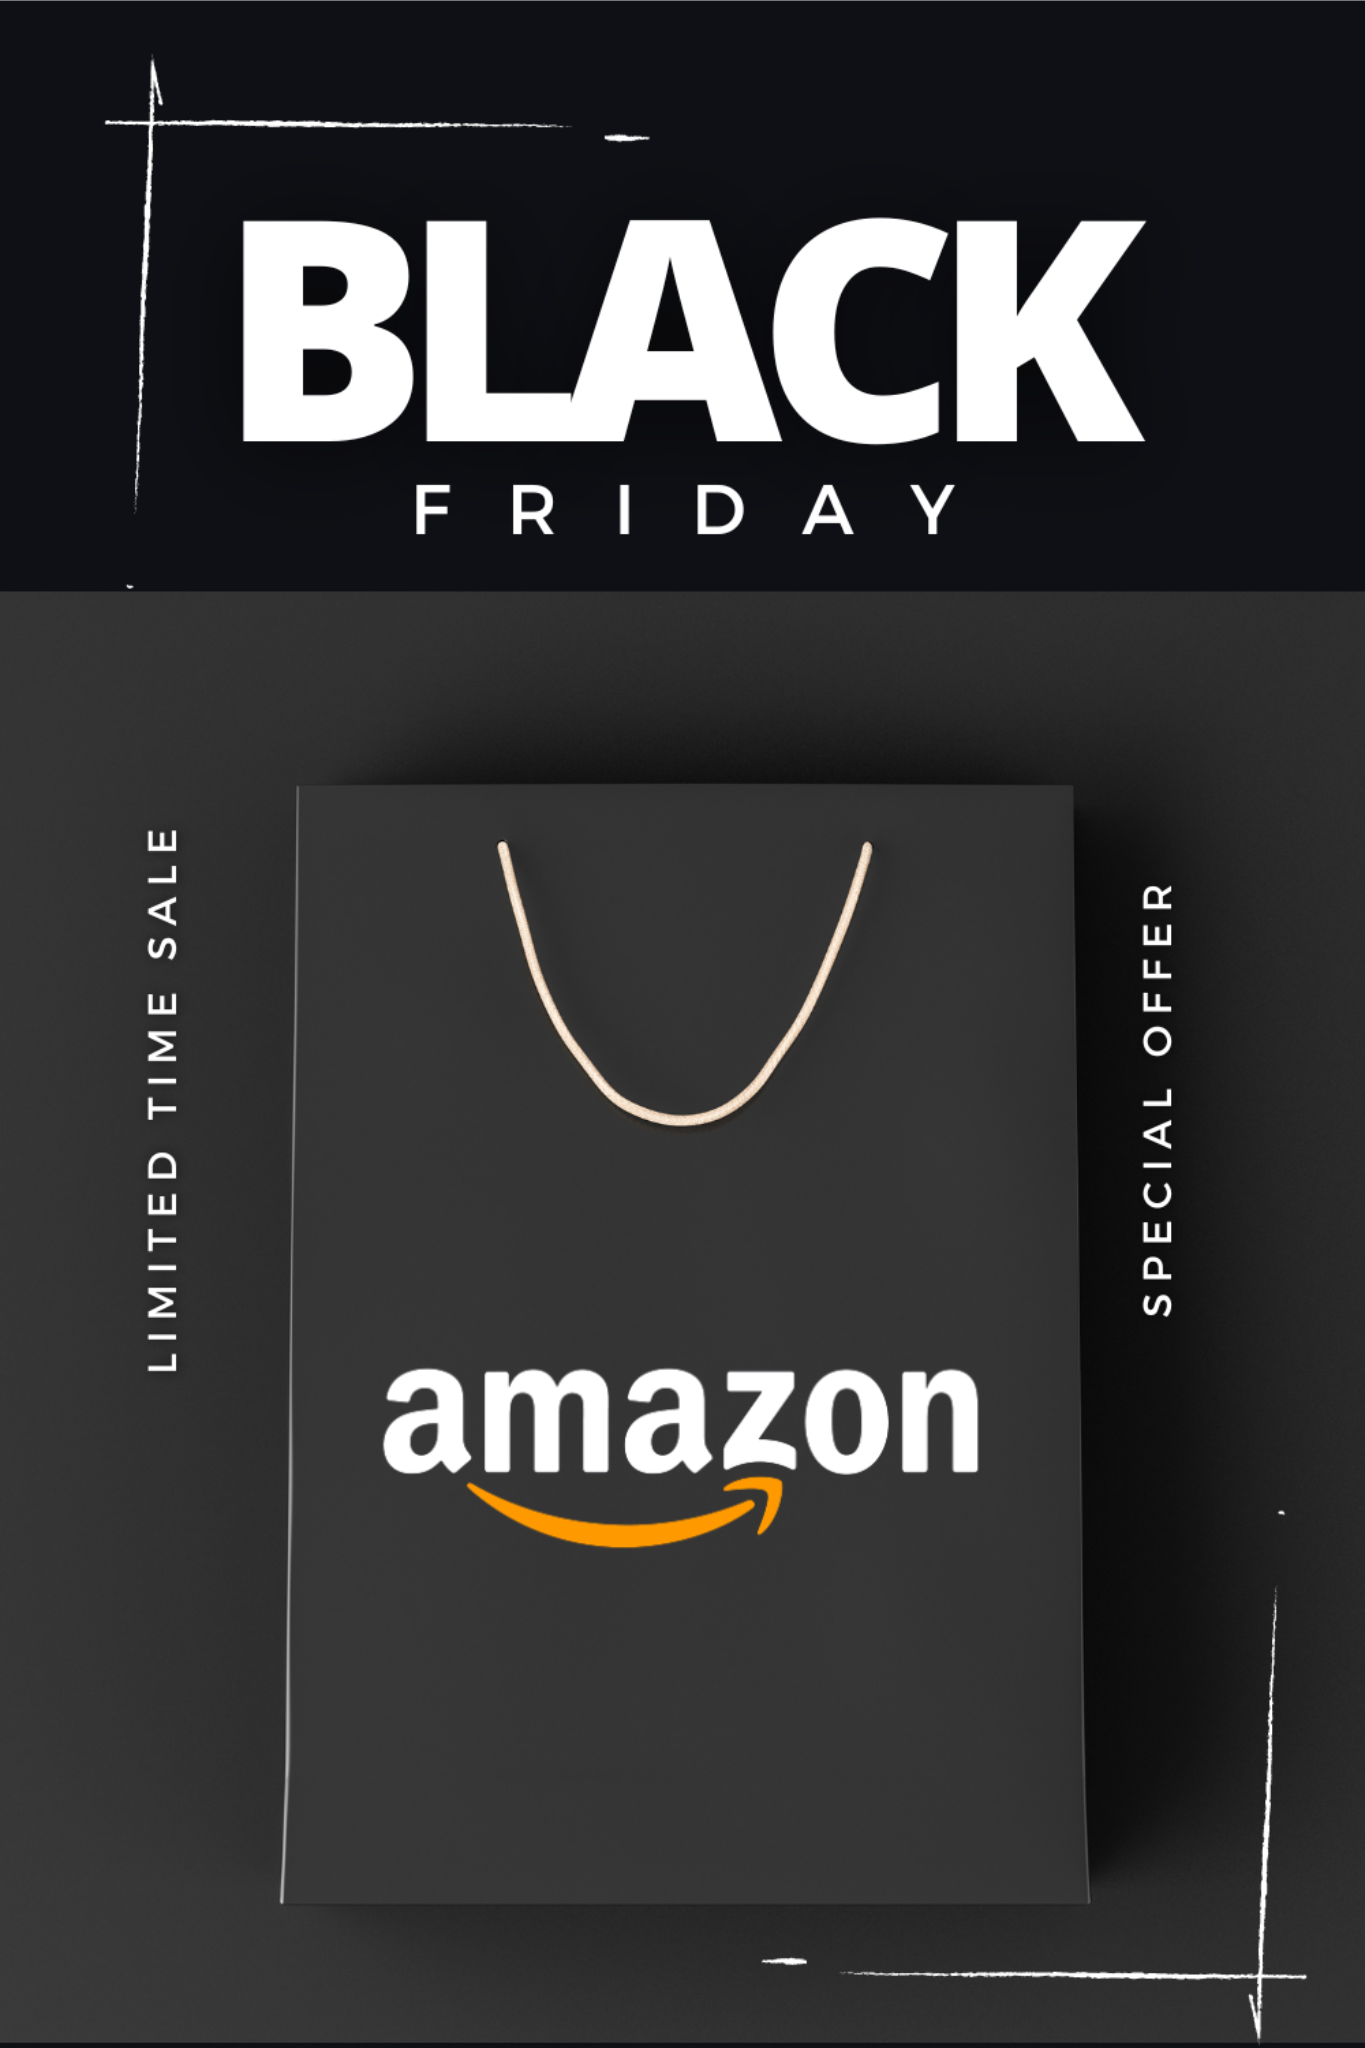 10 Best Amazon Black Friday Deals You Can't Miss